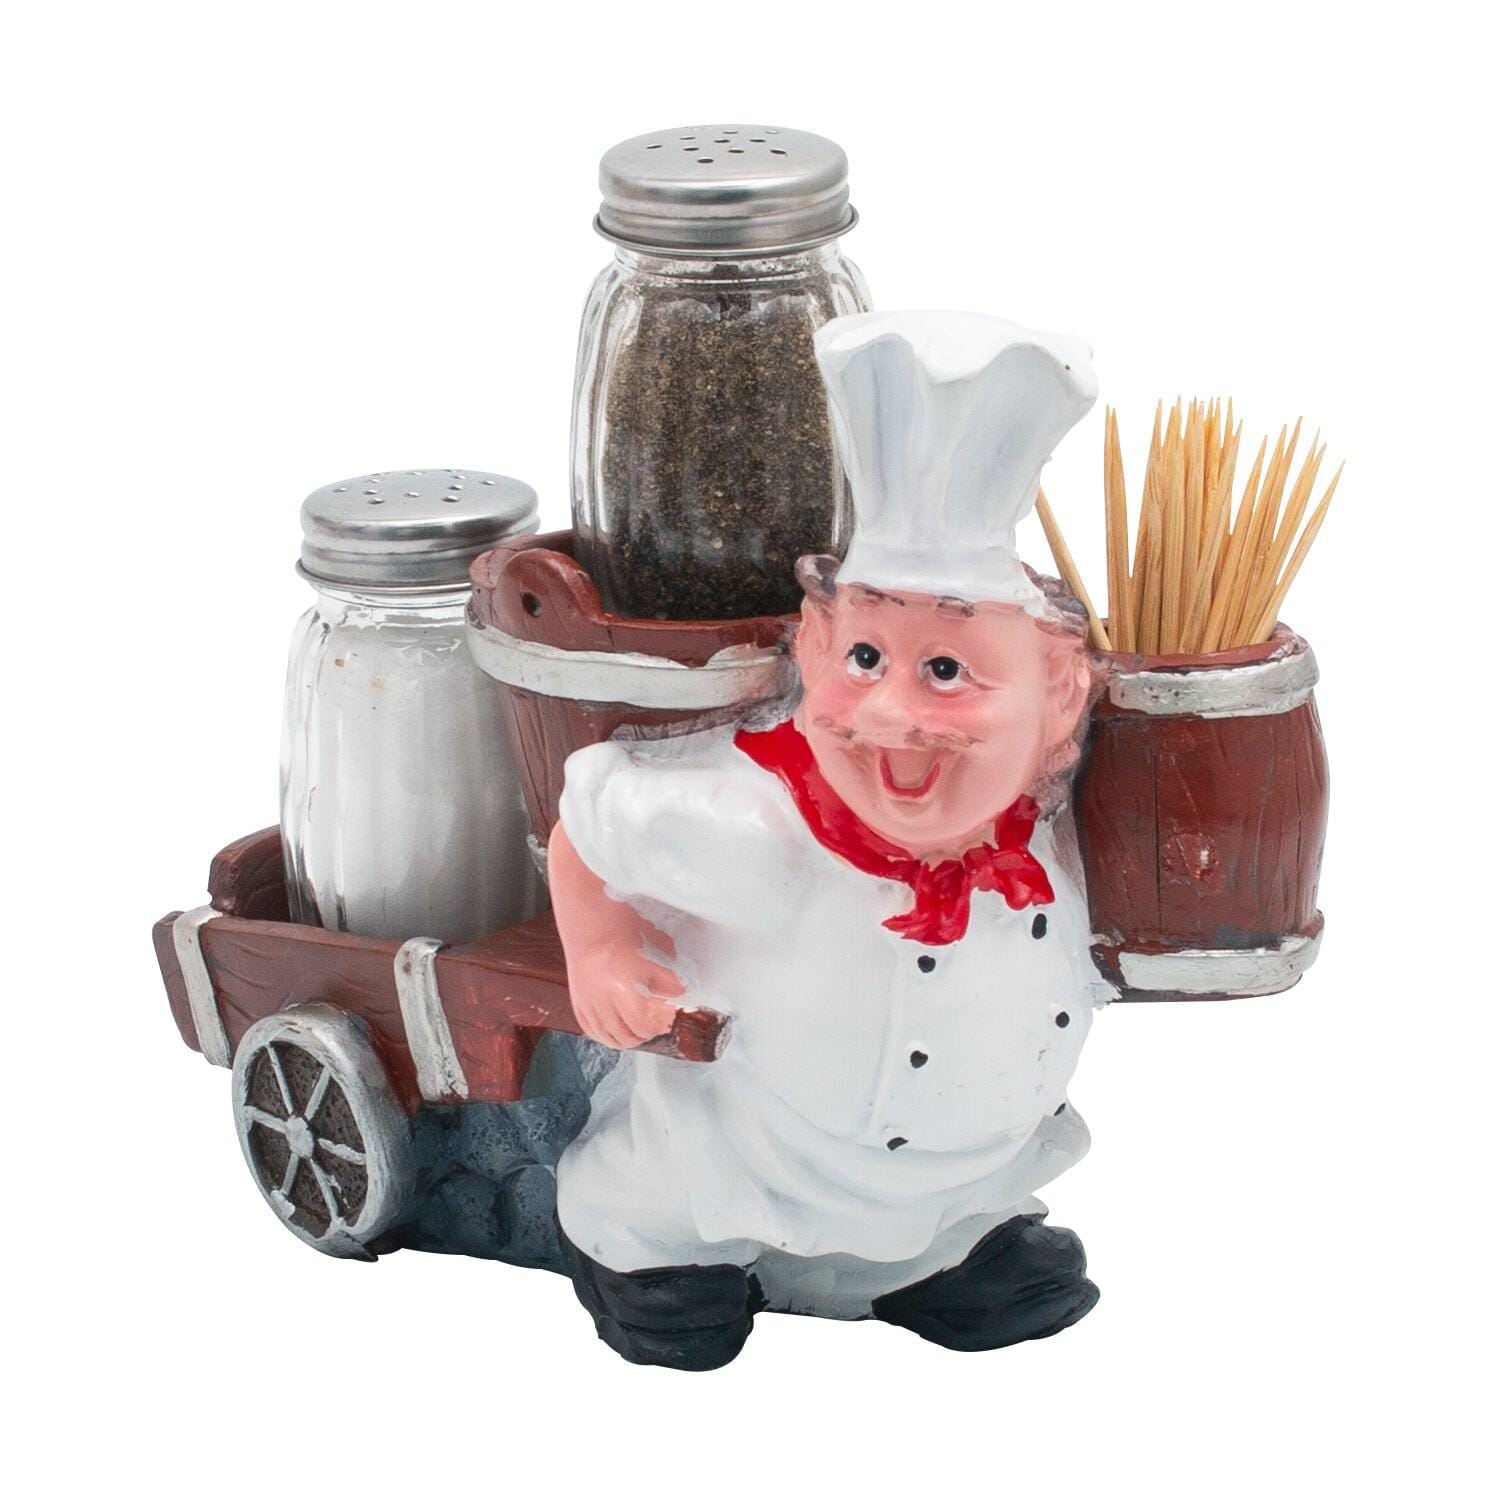 Foodie Chef Figurine Resin Salt & Pepper Shakers with Toothpick Holder Set (Cart on Back)